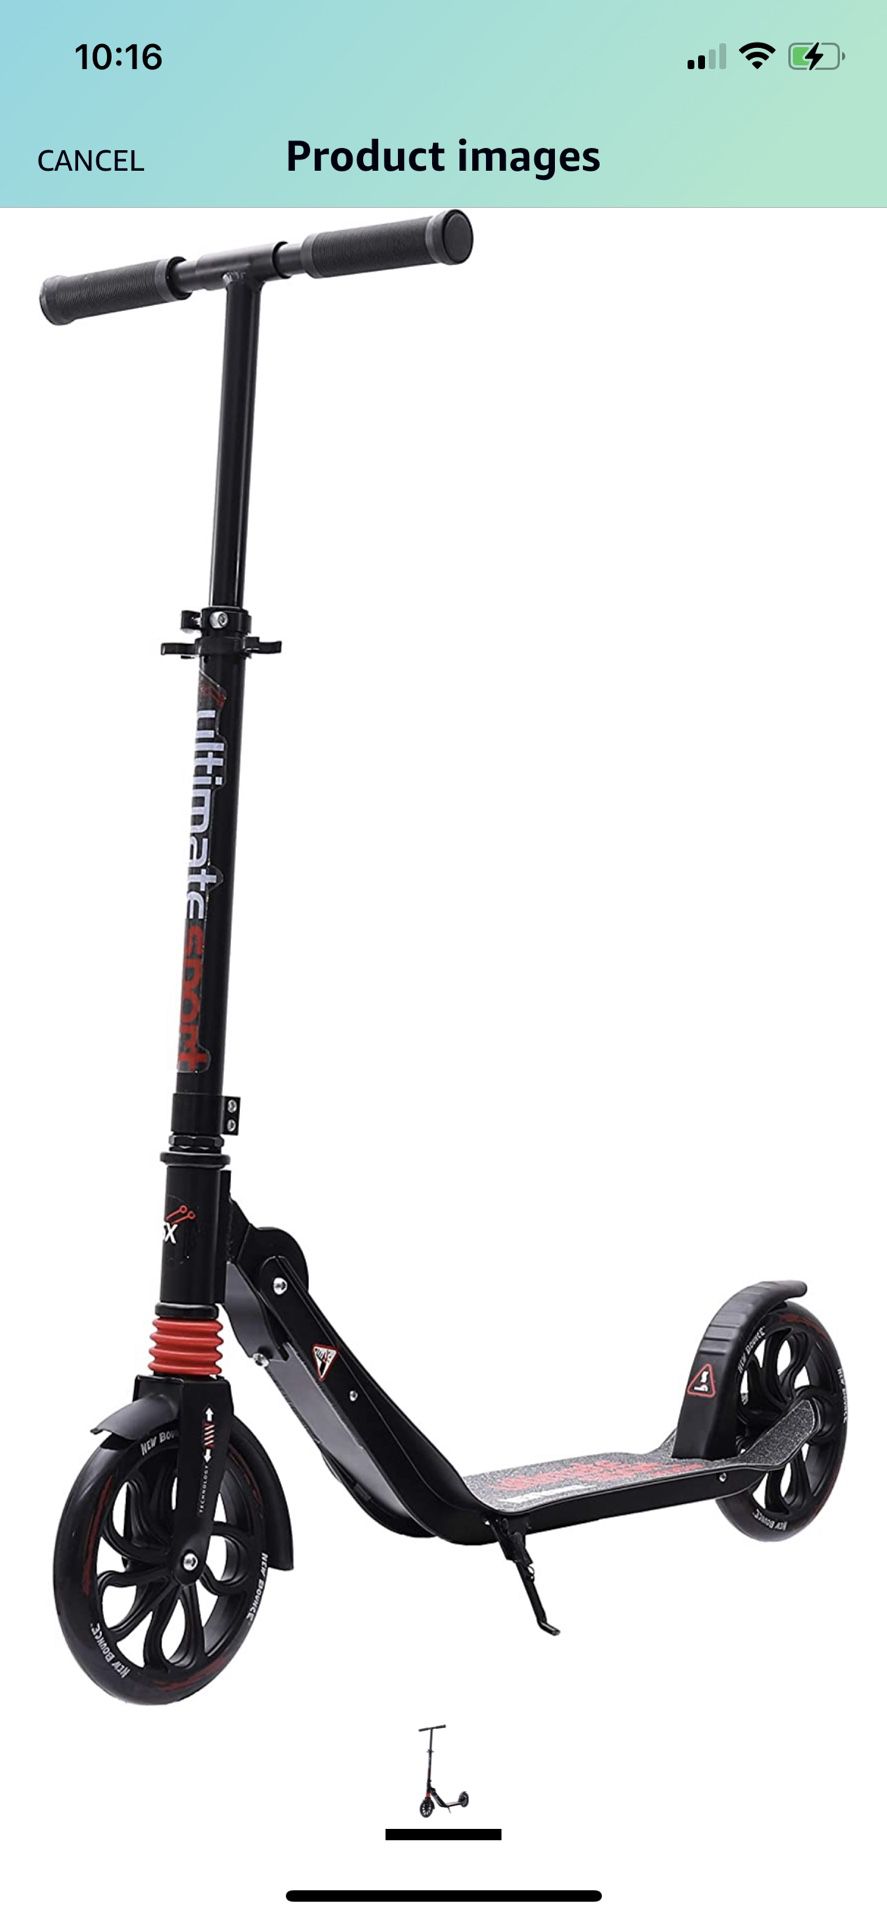 New Bounce Kick Scooter - Big Wheel Scooters for Ages 8 and Up with Adjustable Handlebar